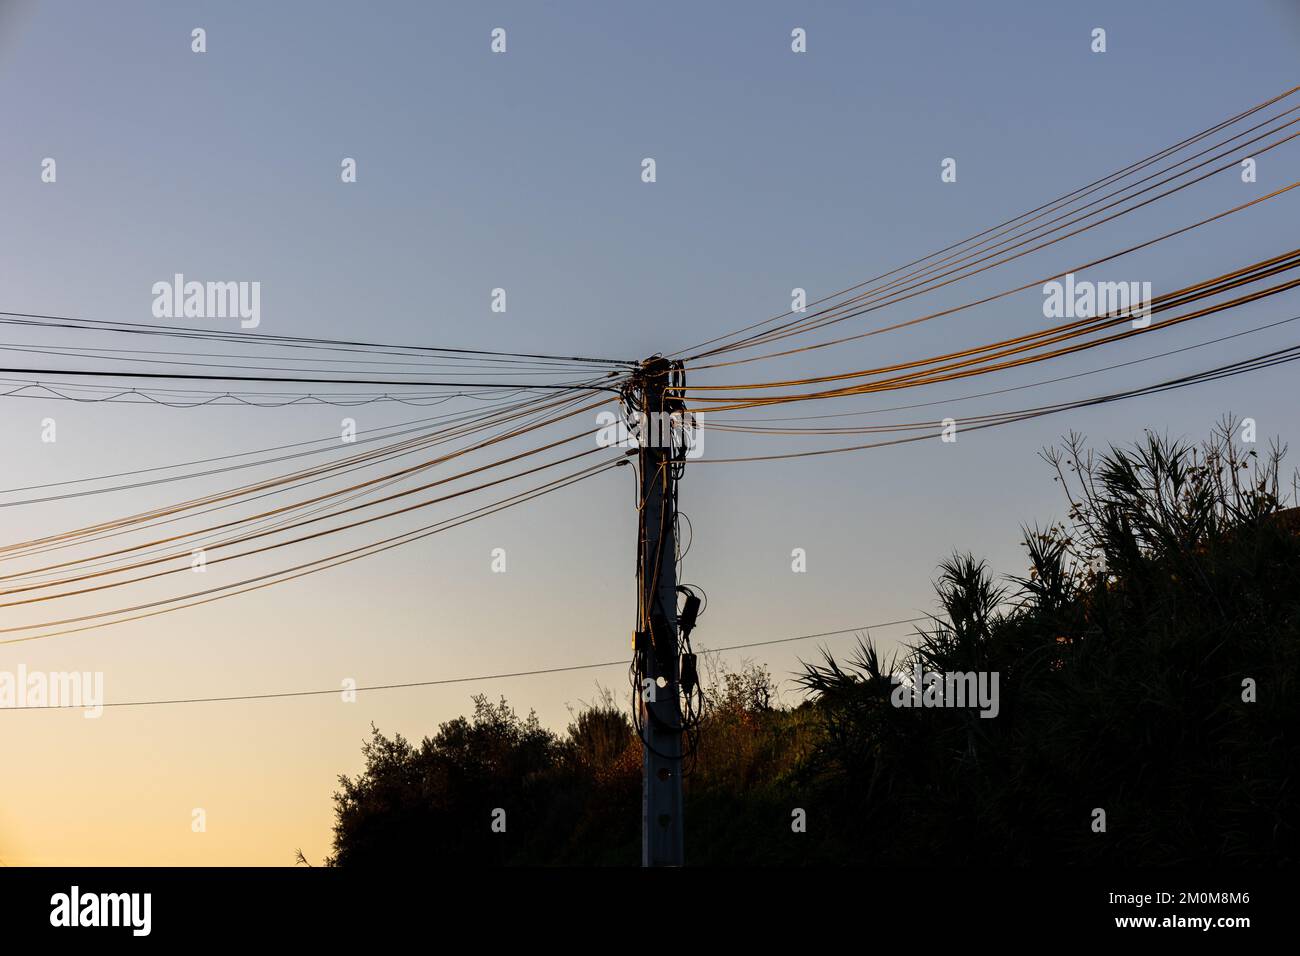 Upper country power lines photographed in evening mood Stock Photo